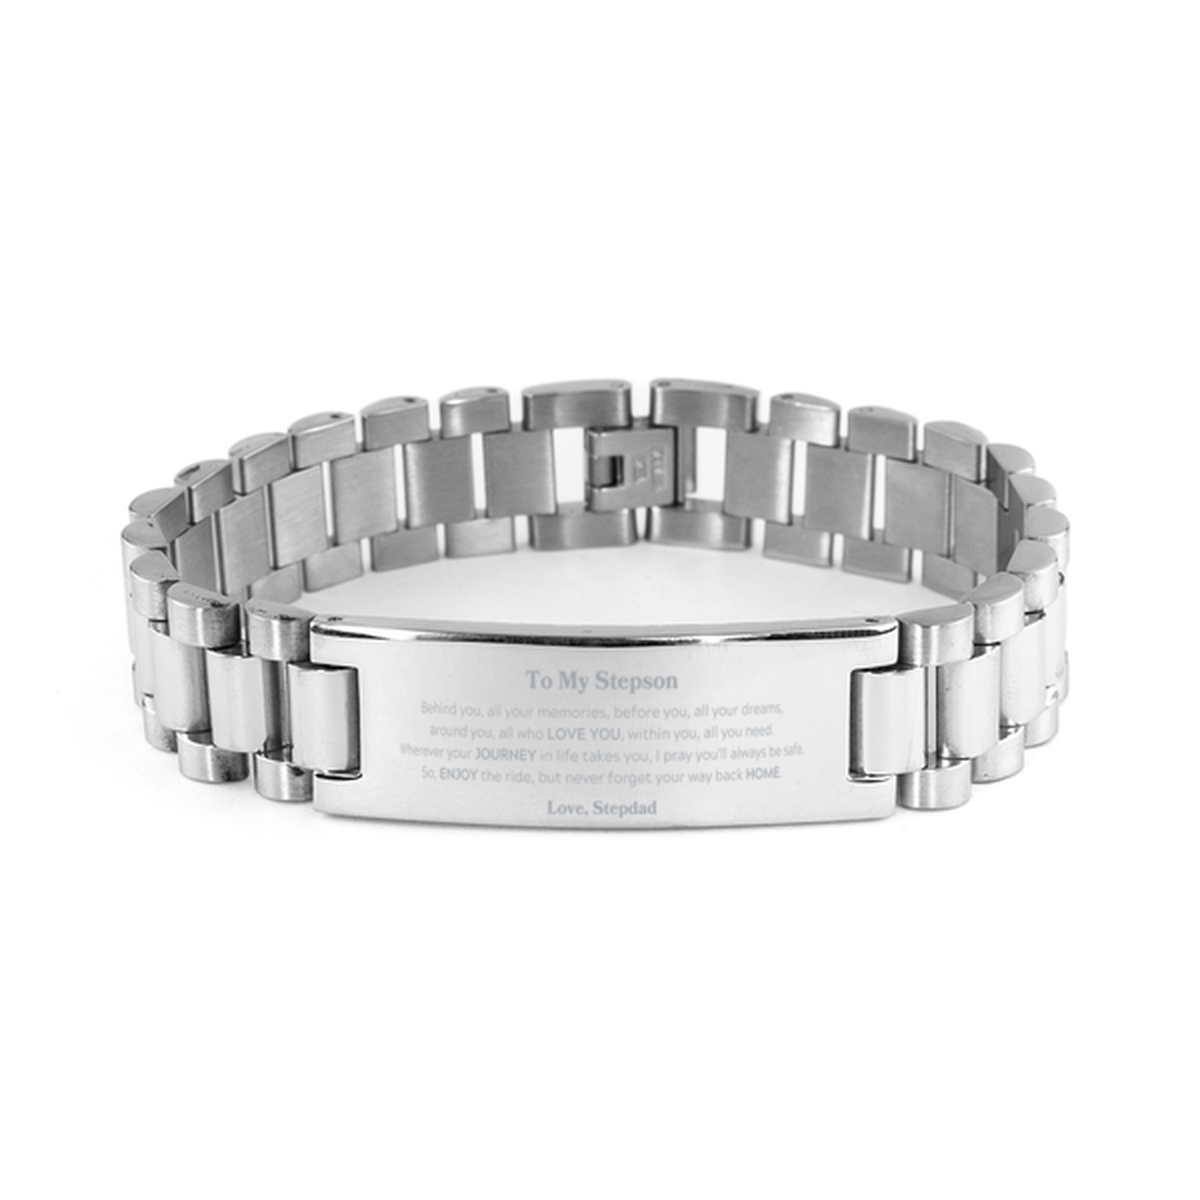 To My Stepson Graduation Gifts from Stepdad, Stepson Ladder Stainless Steel Bracelet Christmas Birthday Gifts for Stepson Behind you, all your memories, before you, all your dreams. Love, Stepdad